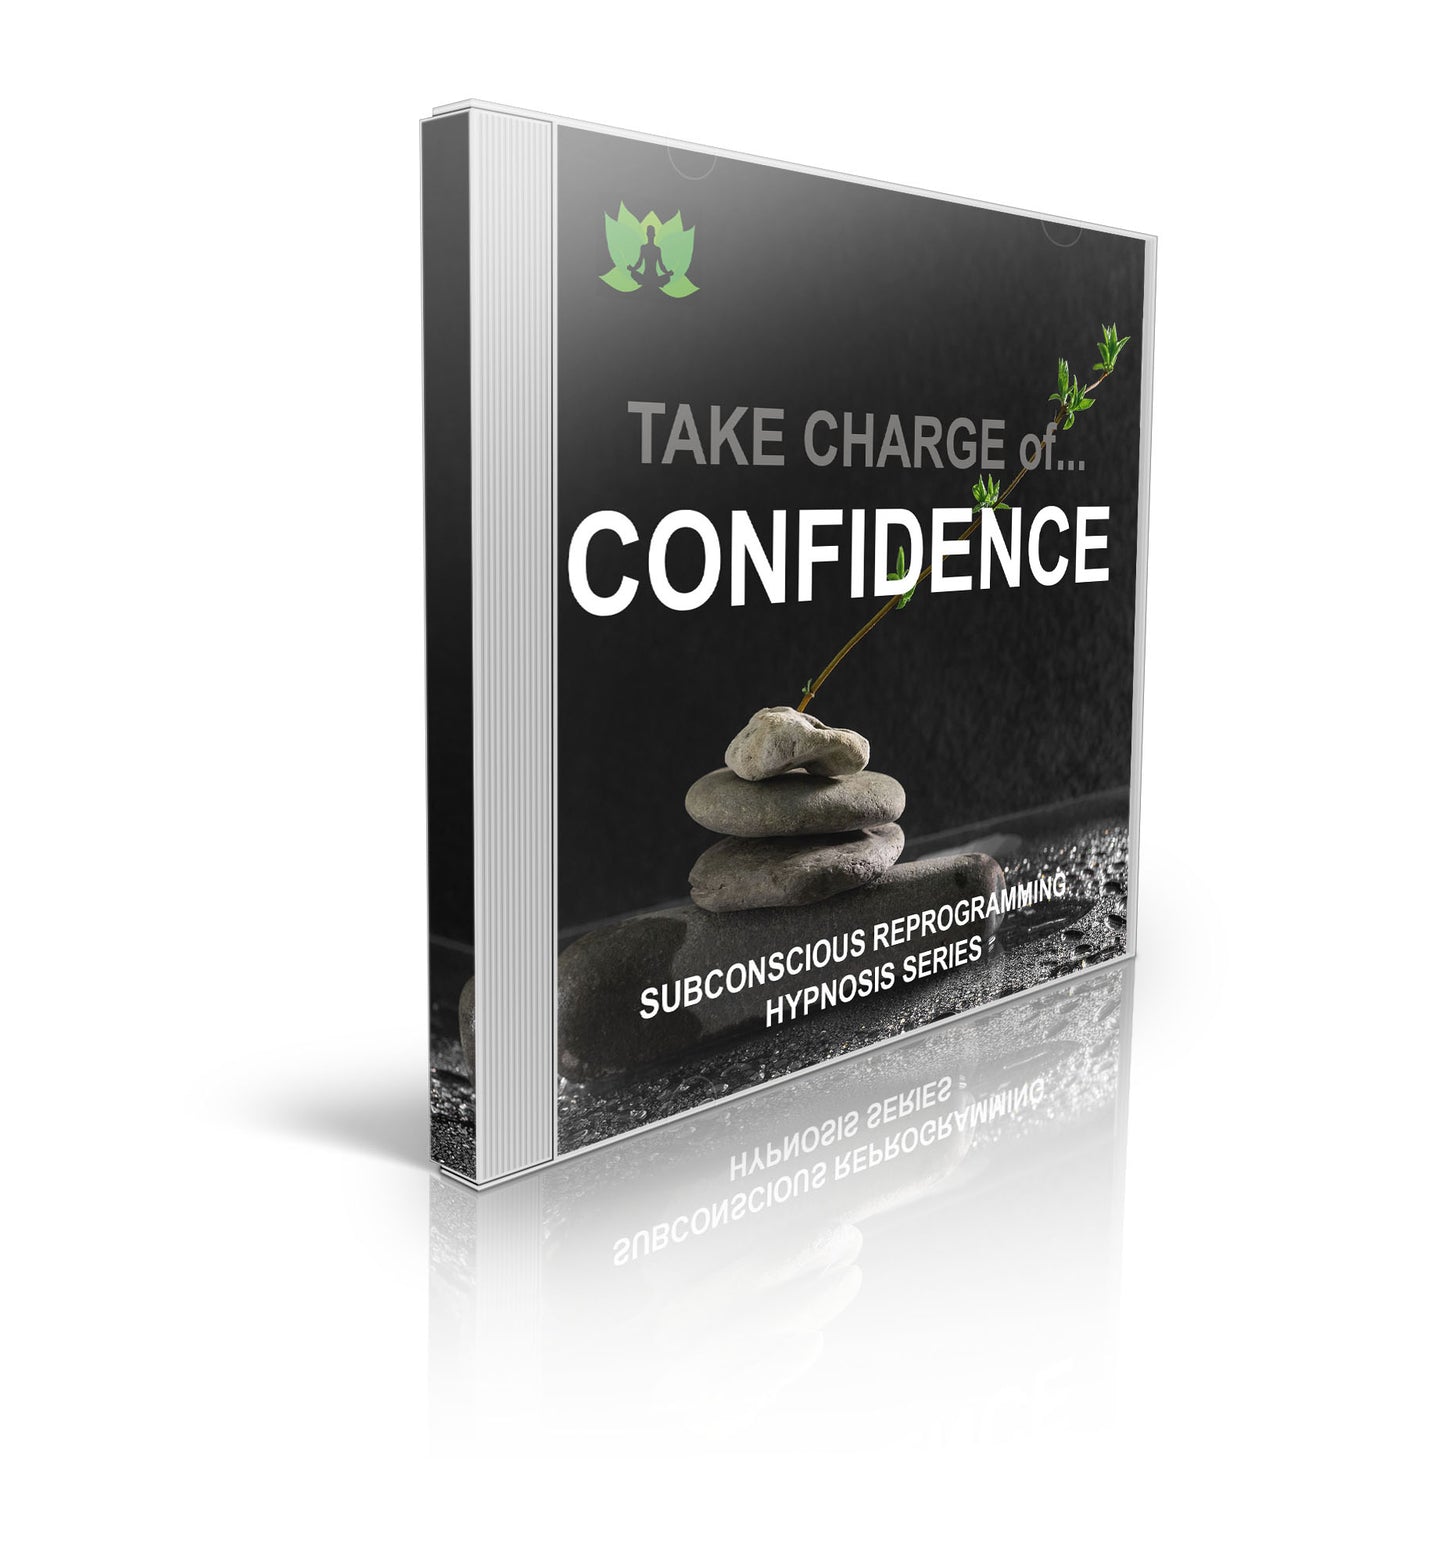 Take Charge of Confidence